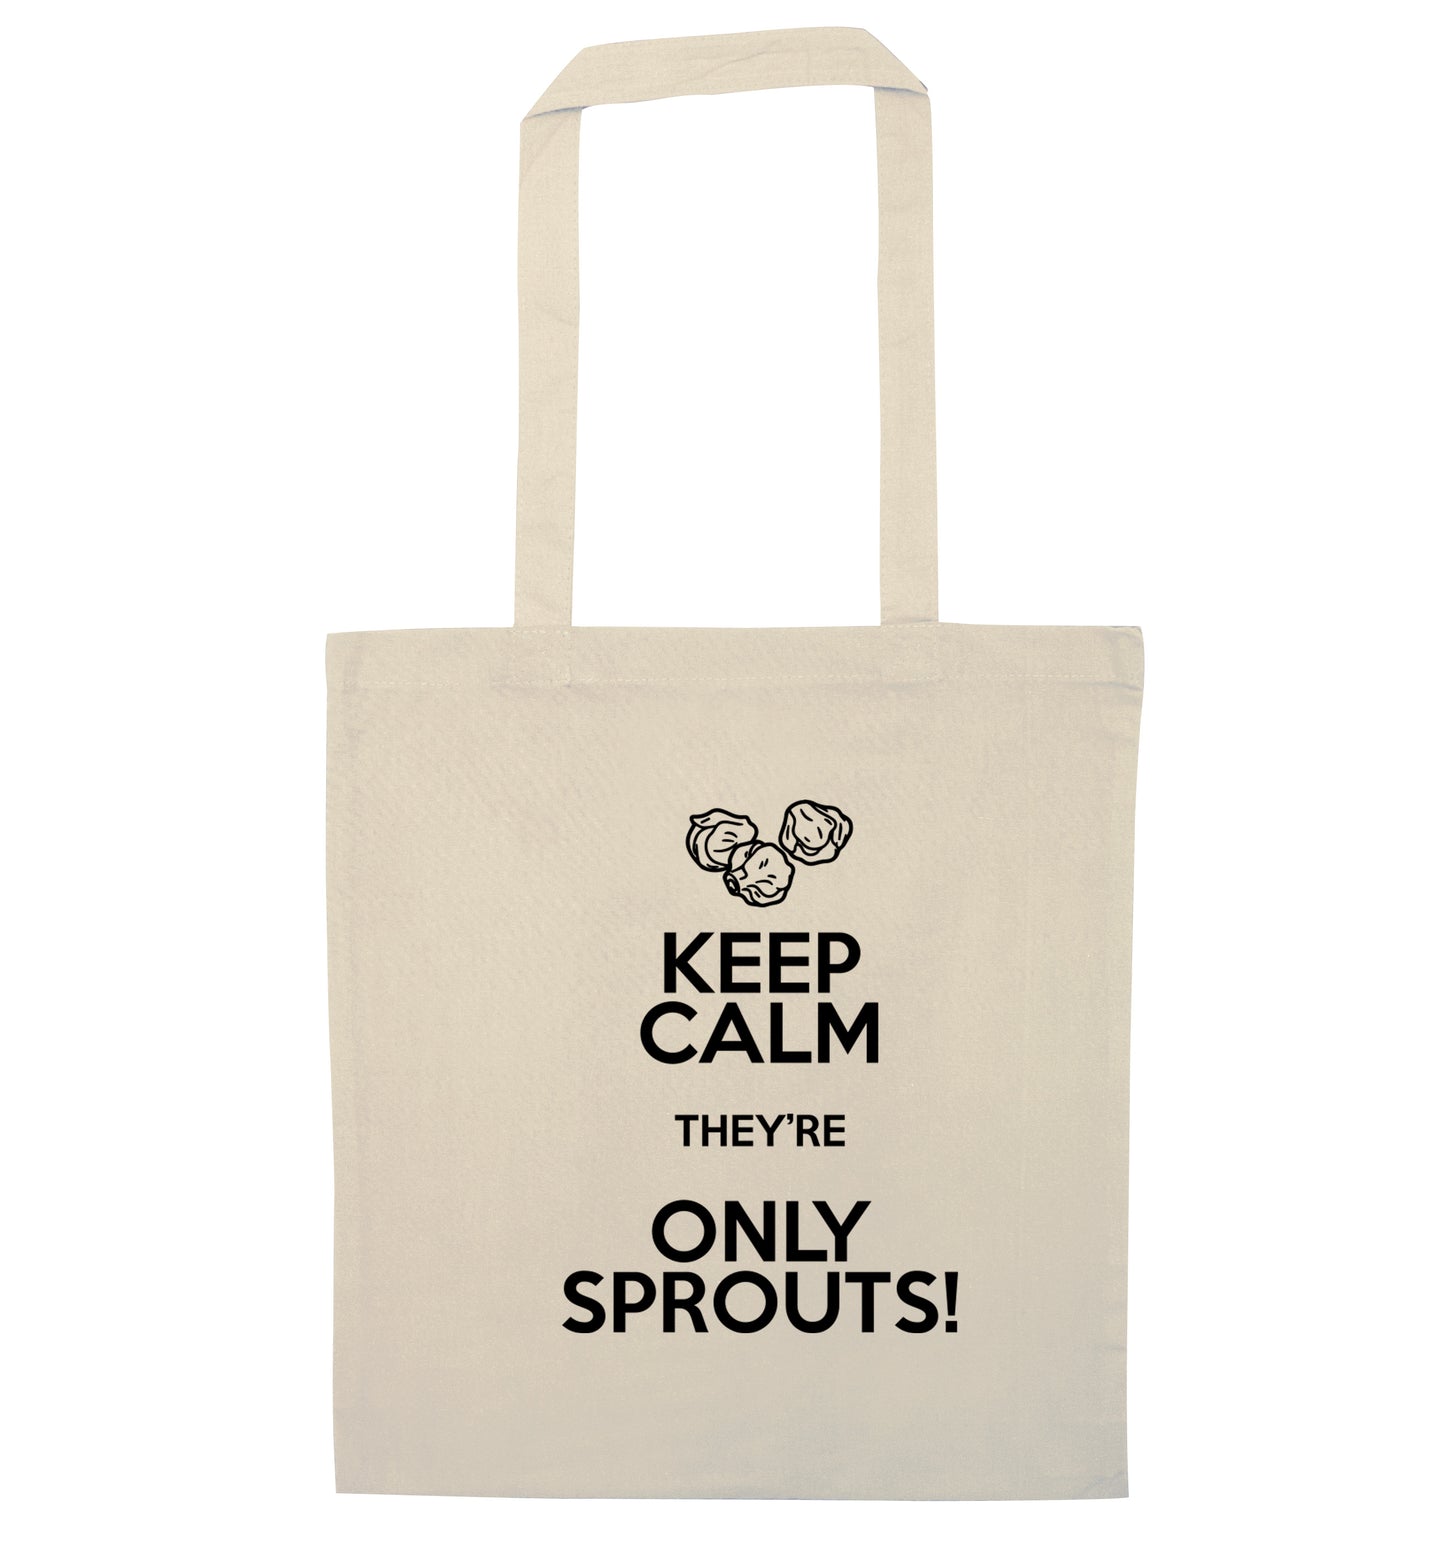 Keep calm they're only sprouts natural tote bag